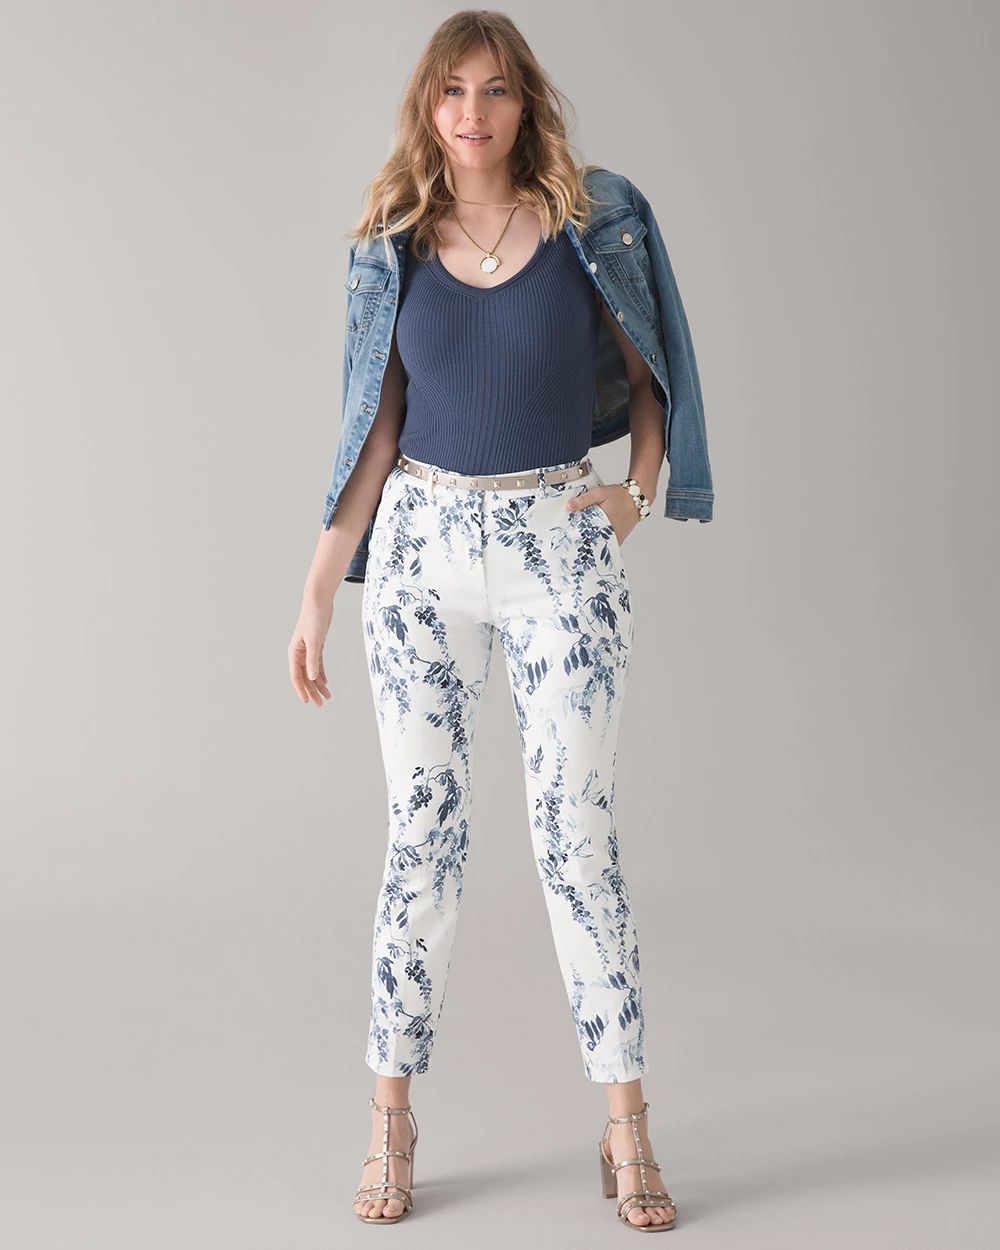 Curvy Mid-Rise Floral Slim Ankle Pants click to view larger image.